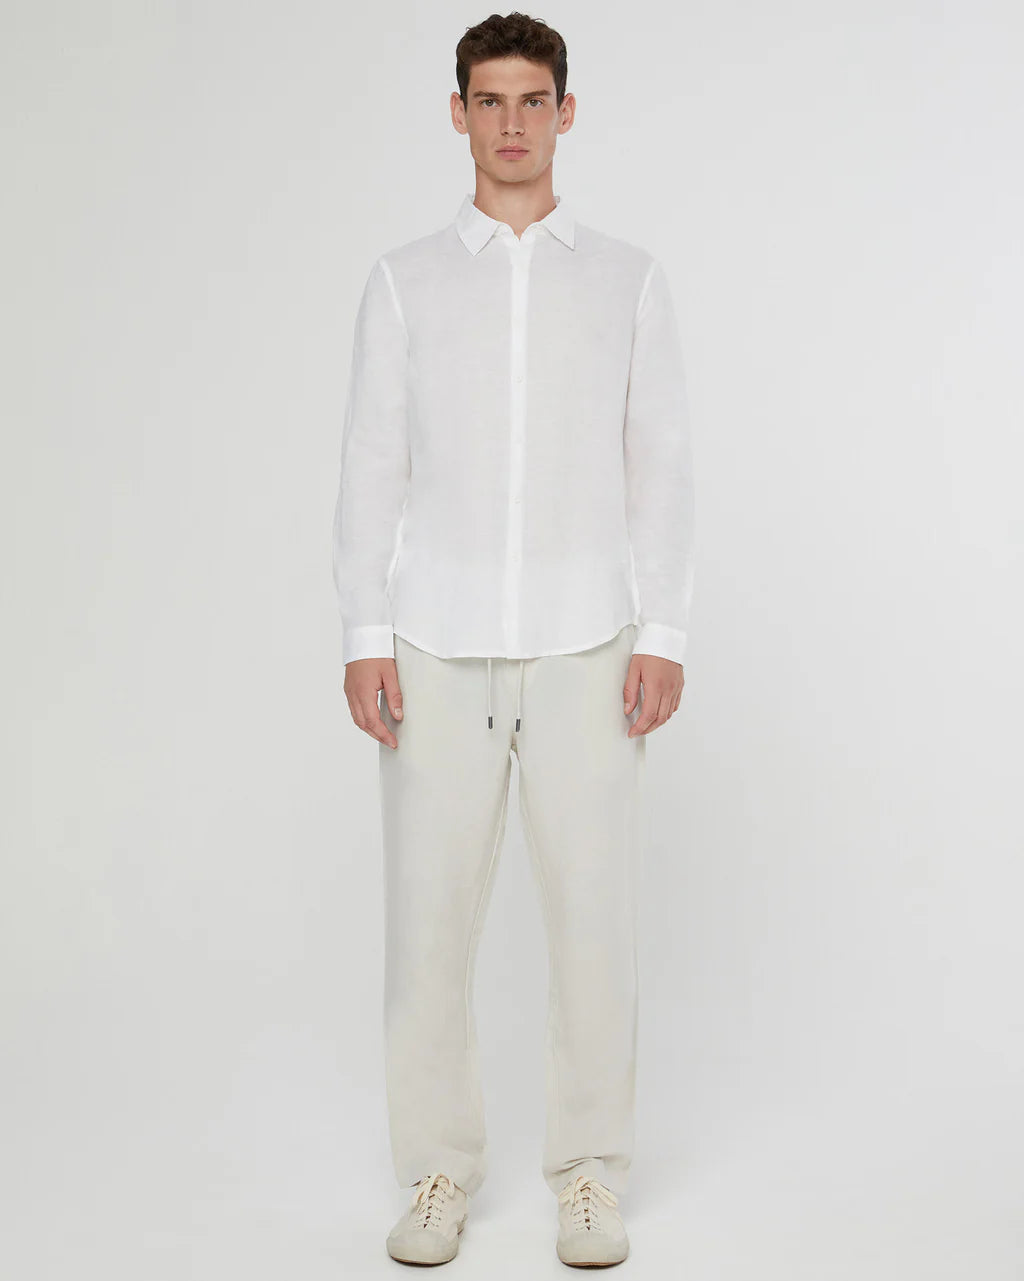 Air Linen Pull-On Pant